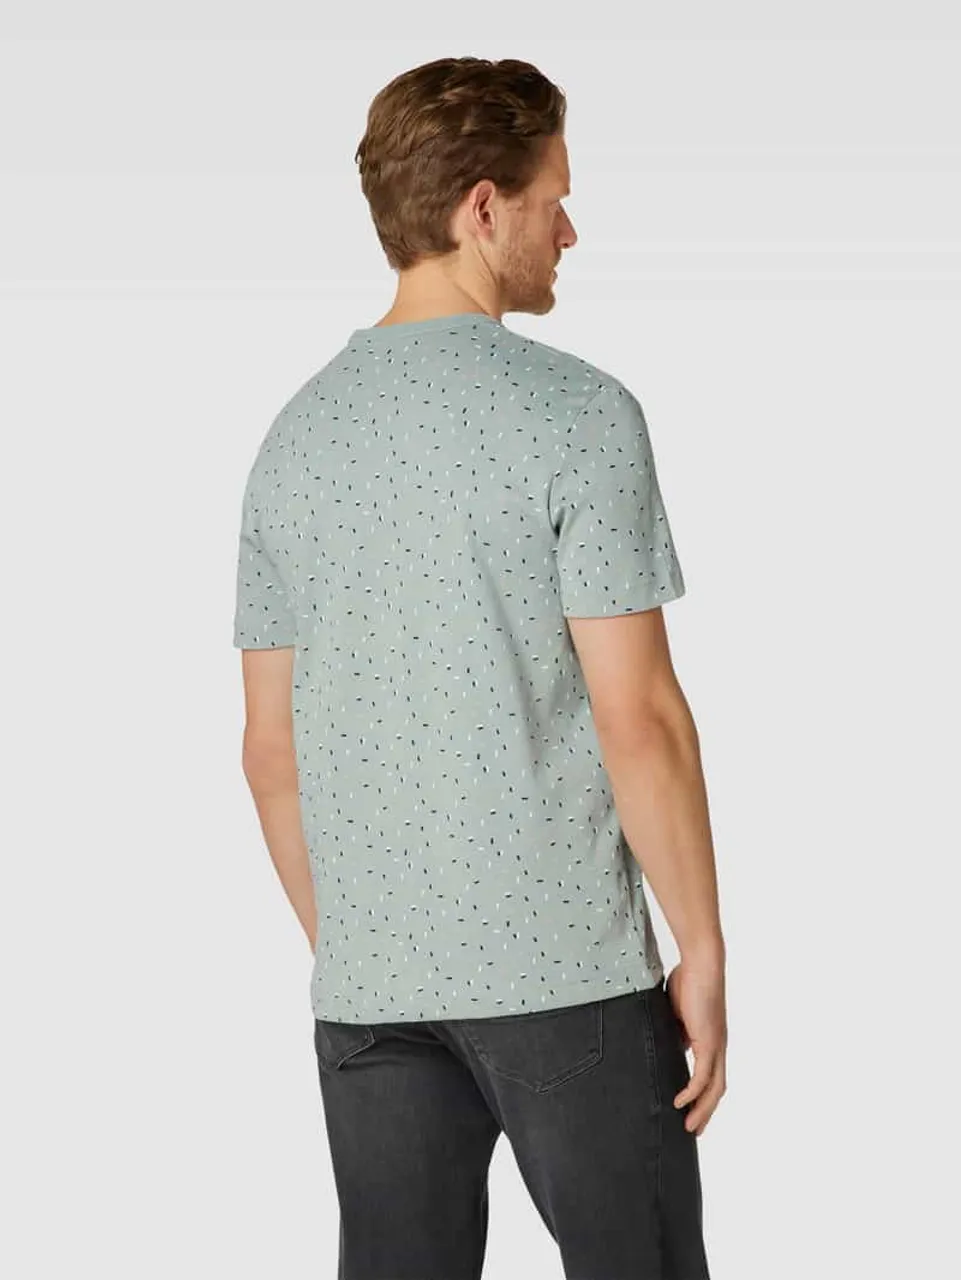 Tom Tailor T-Shirt mit Allover-Muster Modell 'Allover printed' in Mint